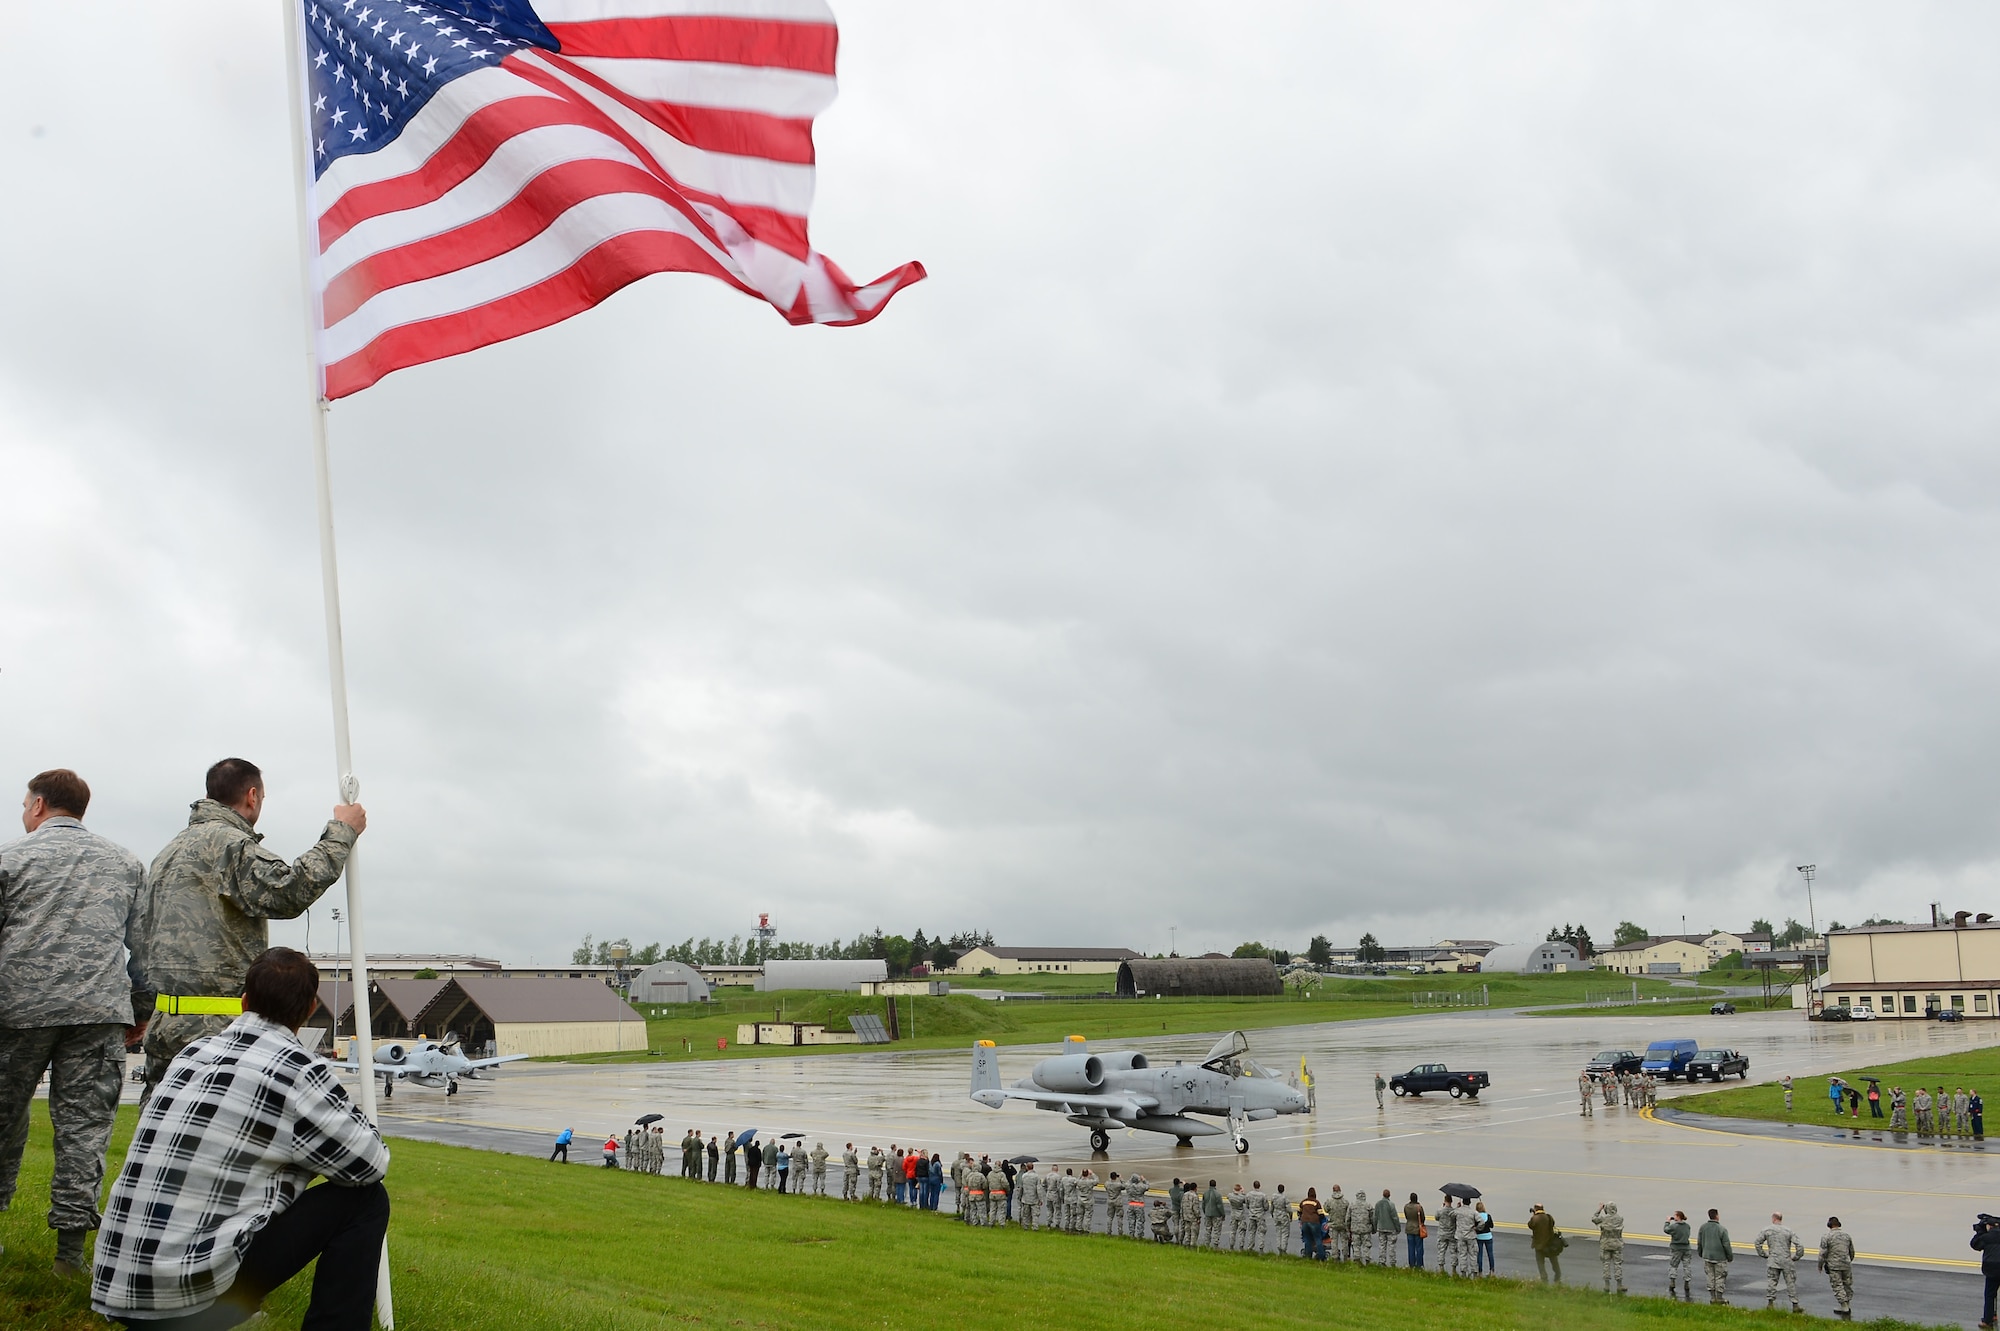 SPANGDAHLEM AIR BASE, Germany – Members of the 52nd Fighter Wing cheer on a U.S. Air Force A-10 Thunderbolt II attack aircraft before its final departure, May 17, 2013. The final four A-10s from the 81st Fighter Squadron left Spangdahlem Air Base and Europe as part of the squadron’s inactivation.  (U.S. Air Force photo by Tech. Sgt. Jonathan Pomeroy/Released)